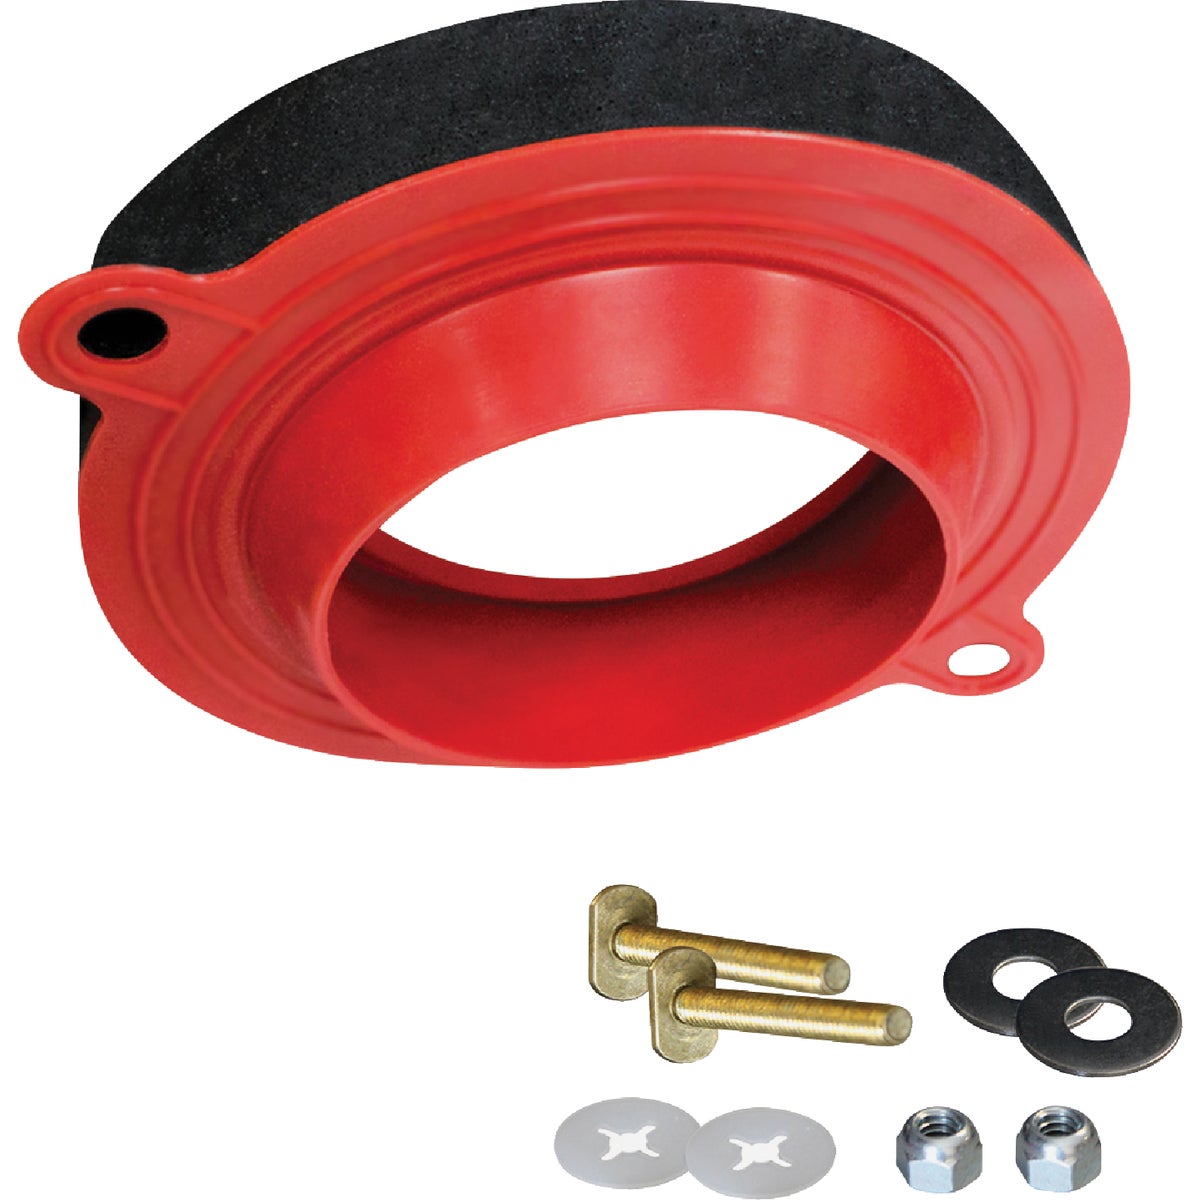 Item 401800, The WaxFREE Seal Kit is a cleaner alternative to using a wax ring during 